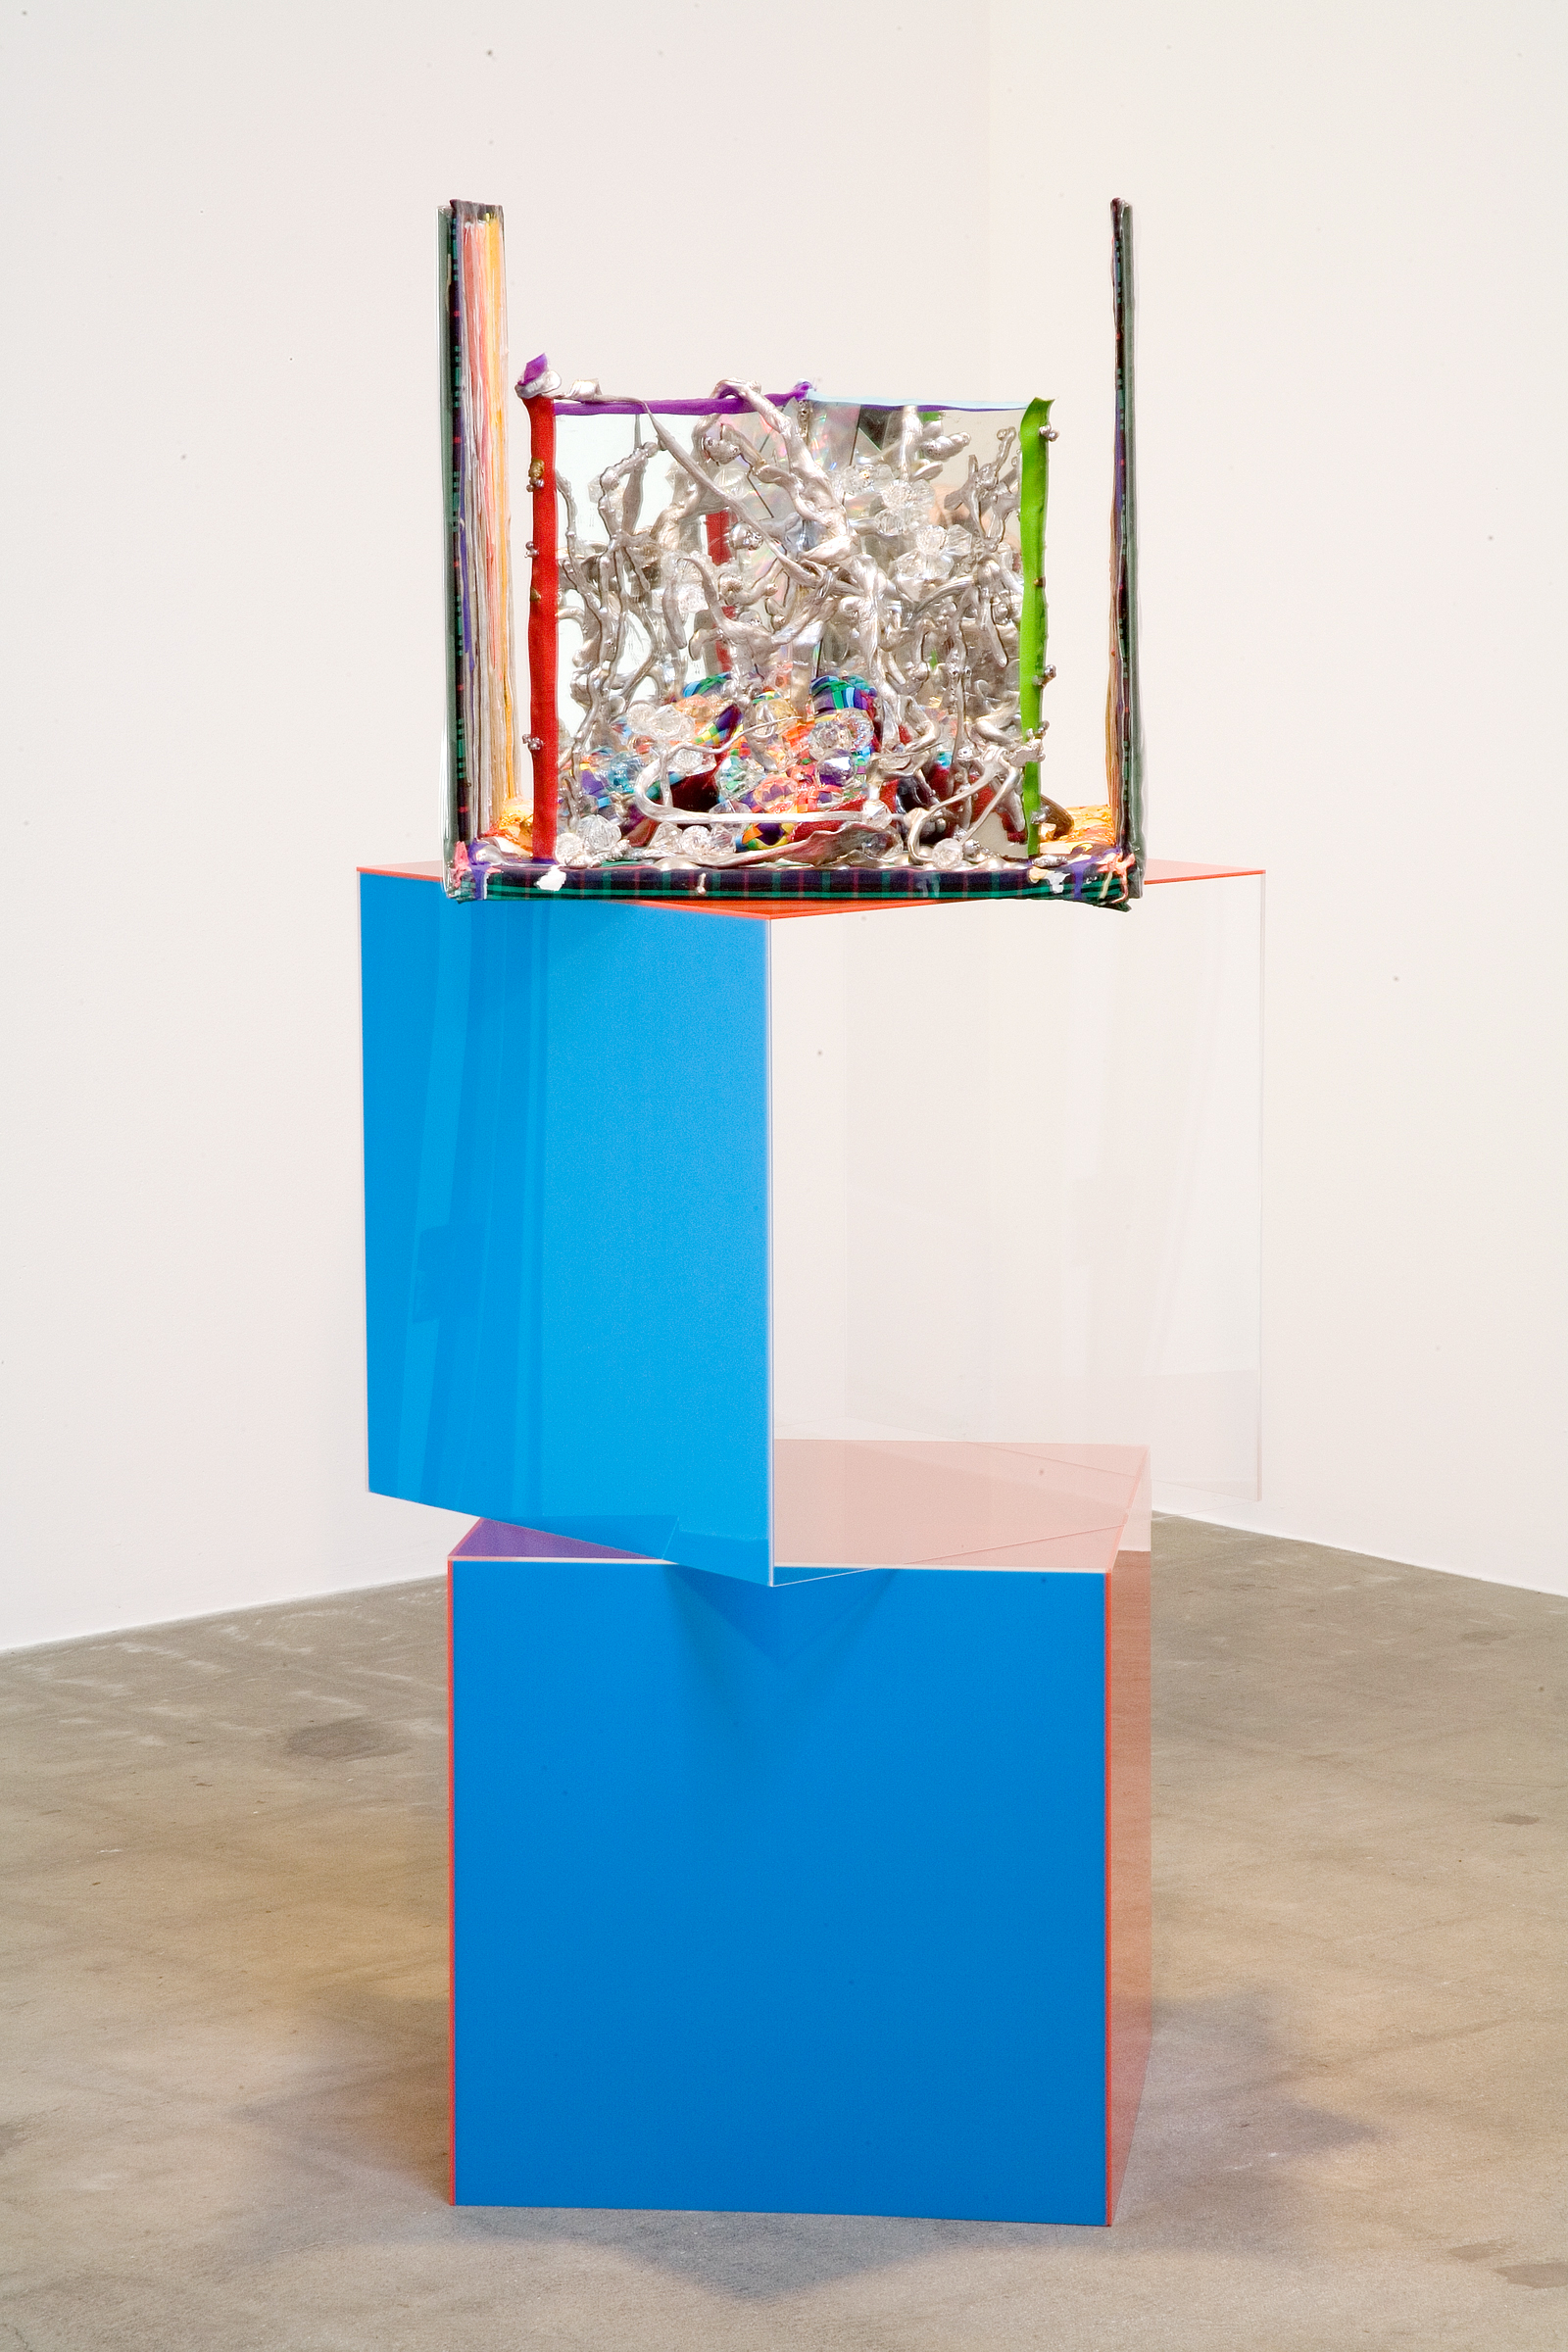  Ins and Outs of Digging Deep, 2006  plexiglass, mirror, paint, plastic, fabric, ribbons, liquid silver, glue, gold leaf, wax, clay, seeds, holographic stickers  54 X 25 1/2 X 25 1/2" / 137.2 X 65 x 65Cm    